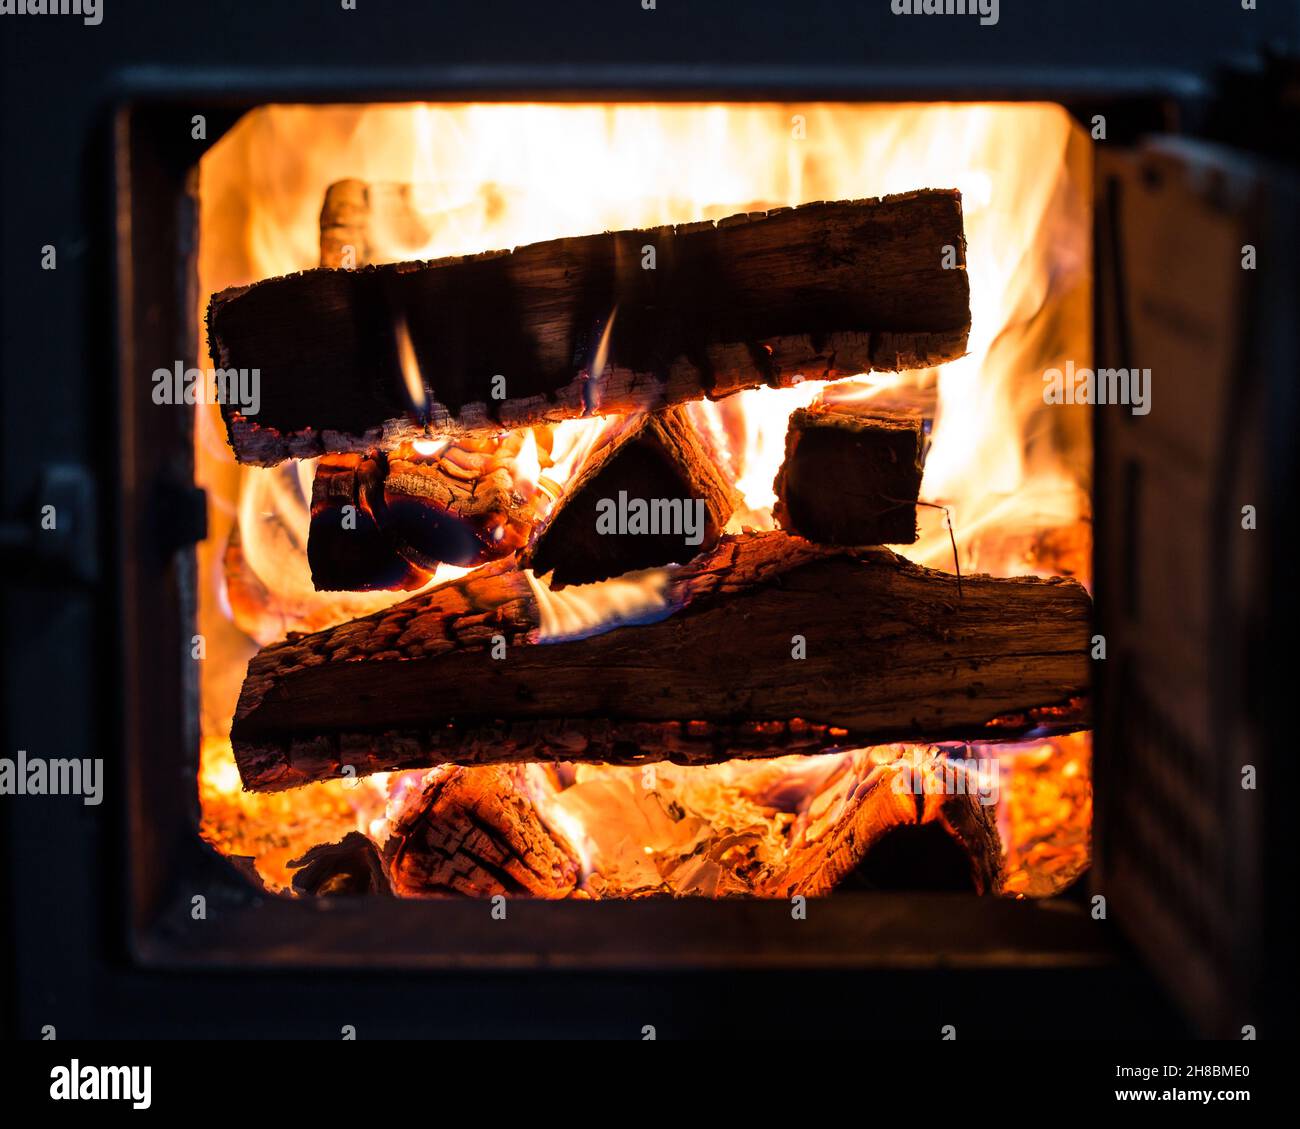 A burning pile of wood in the stove Stock Photo